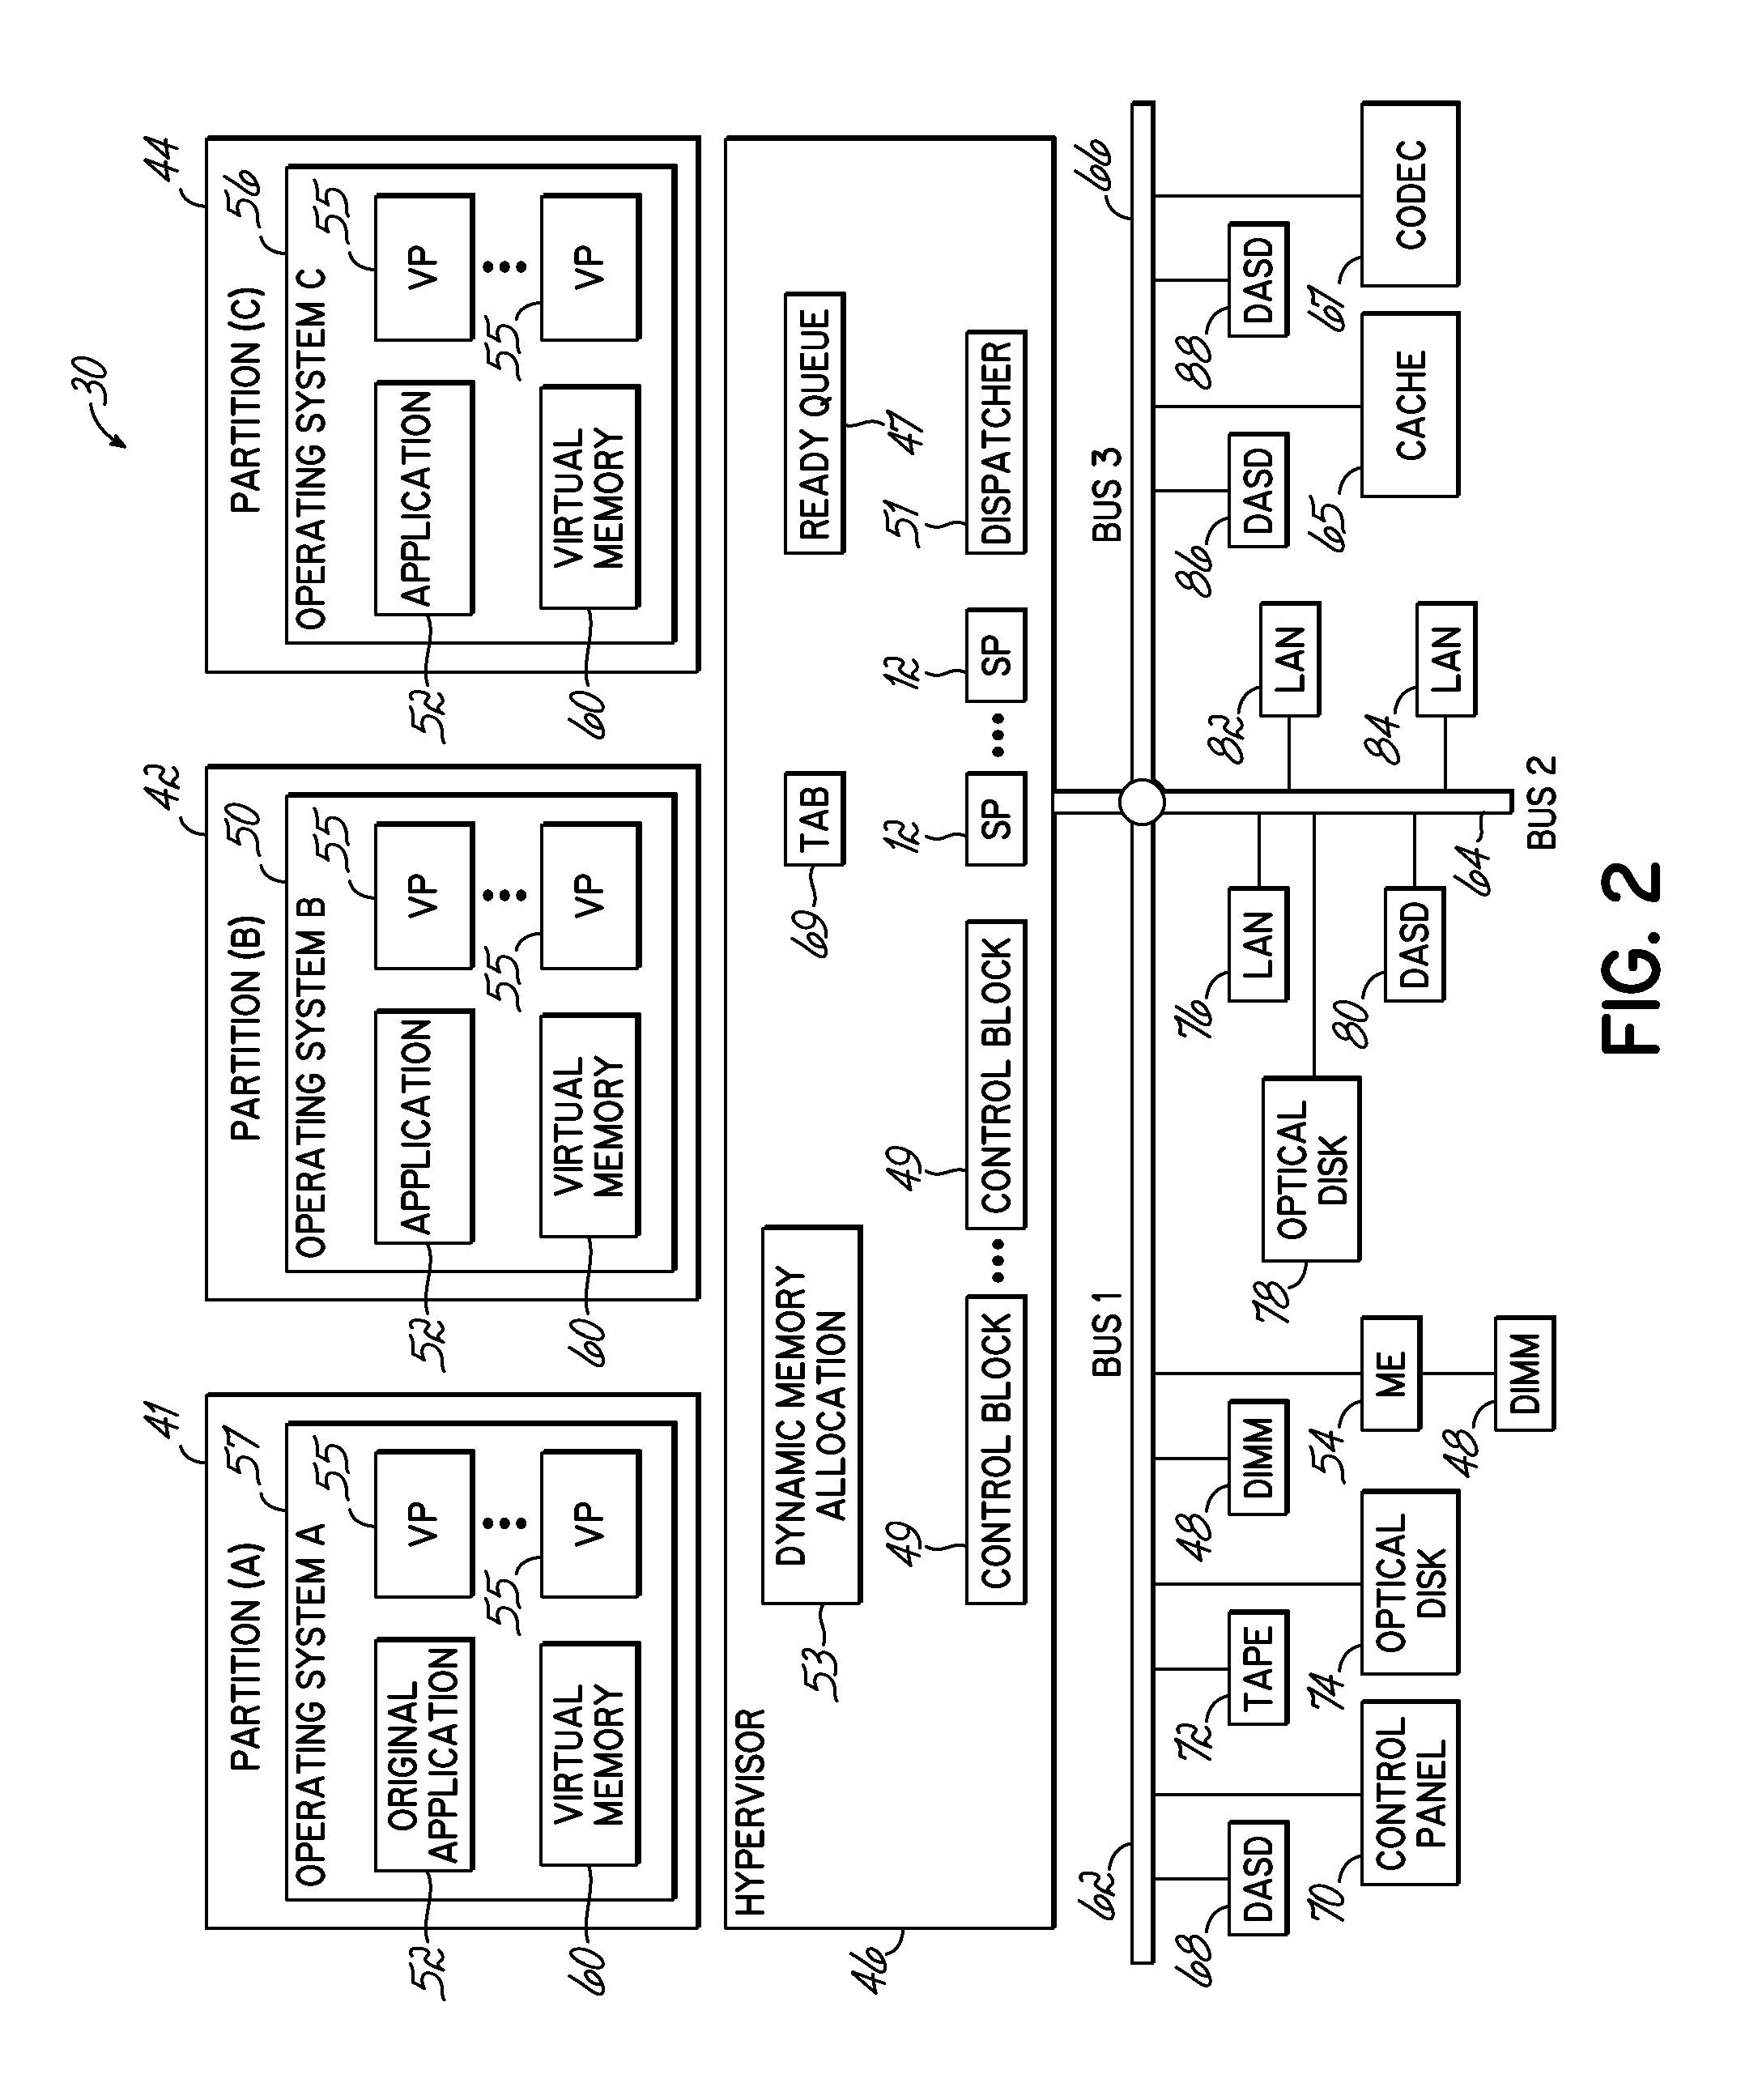 Memory compression implementation in a multi-node server system with directly attached processor memory